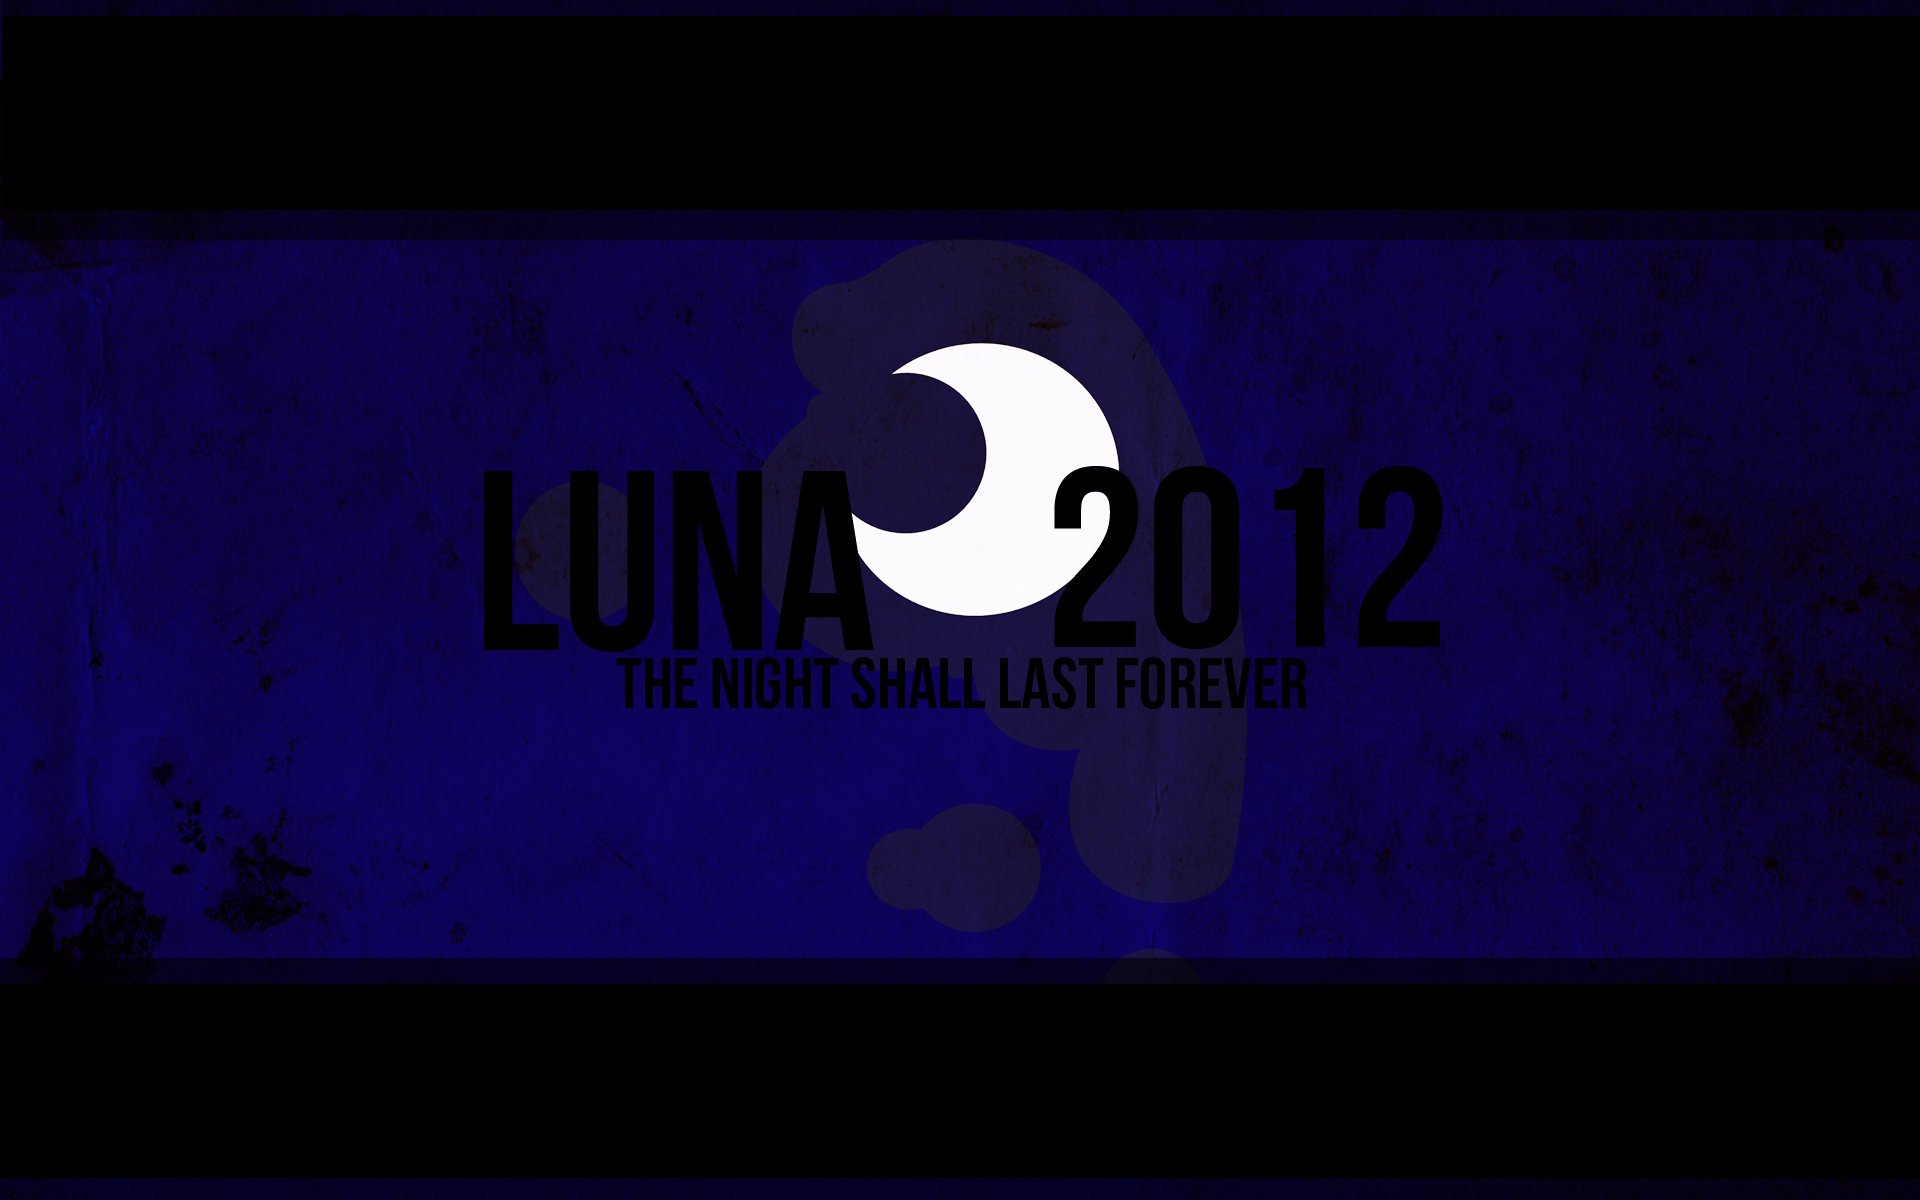 LUNA 2012- THE NIGHT SHALL LAST FOREVER by lucid-rainbow